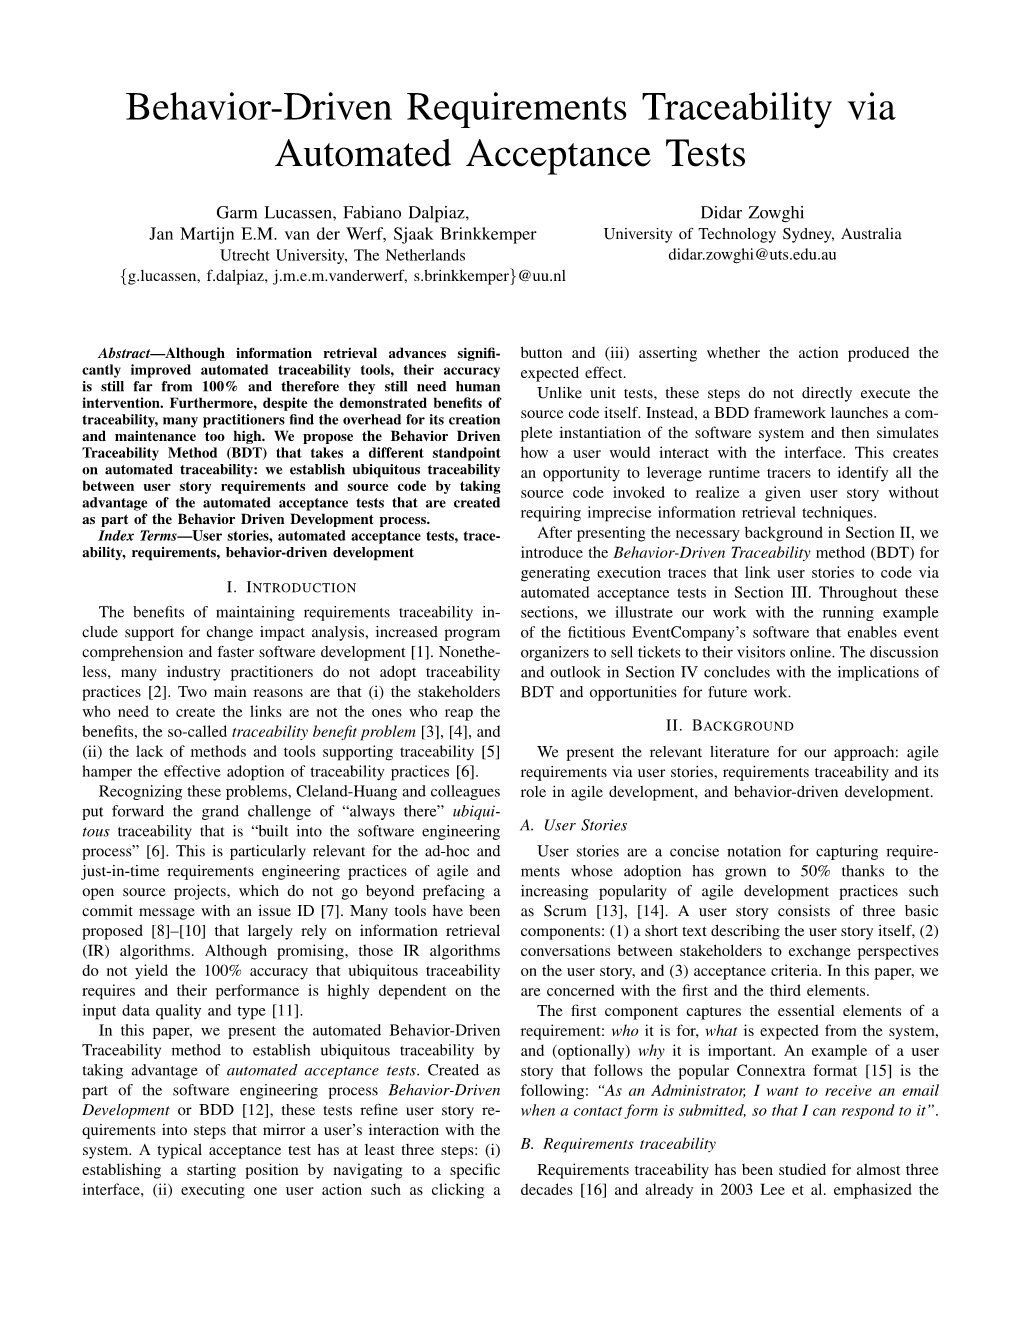 Behavior-Driven Requirements Traceability Via Automated Acceptance Tests